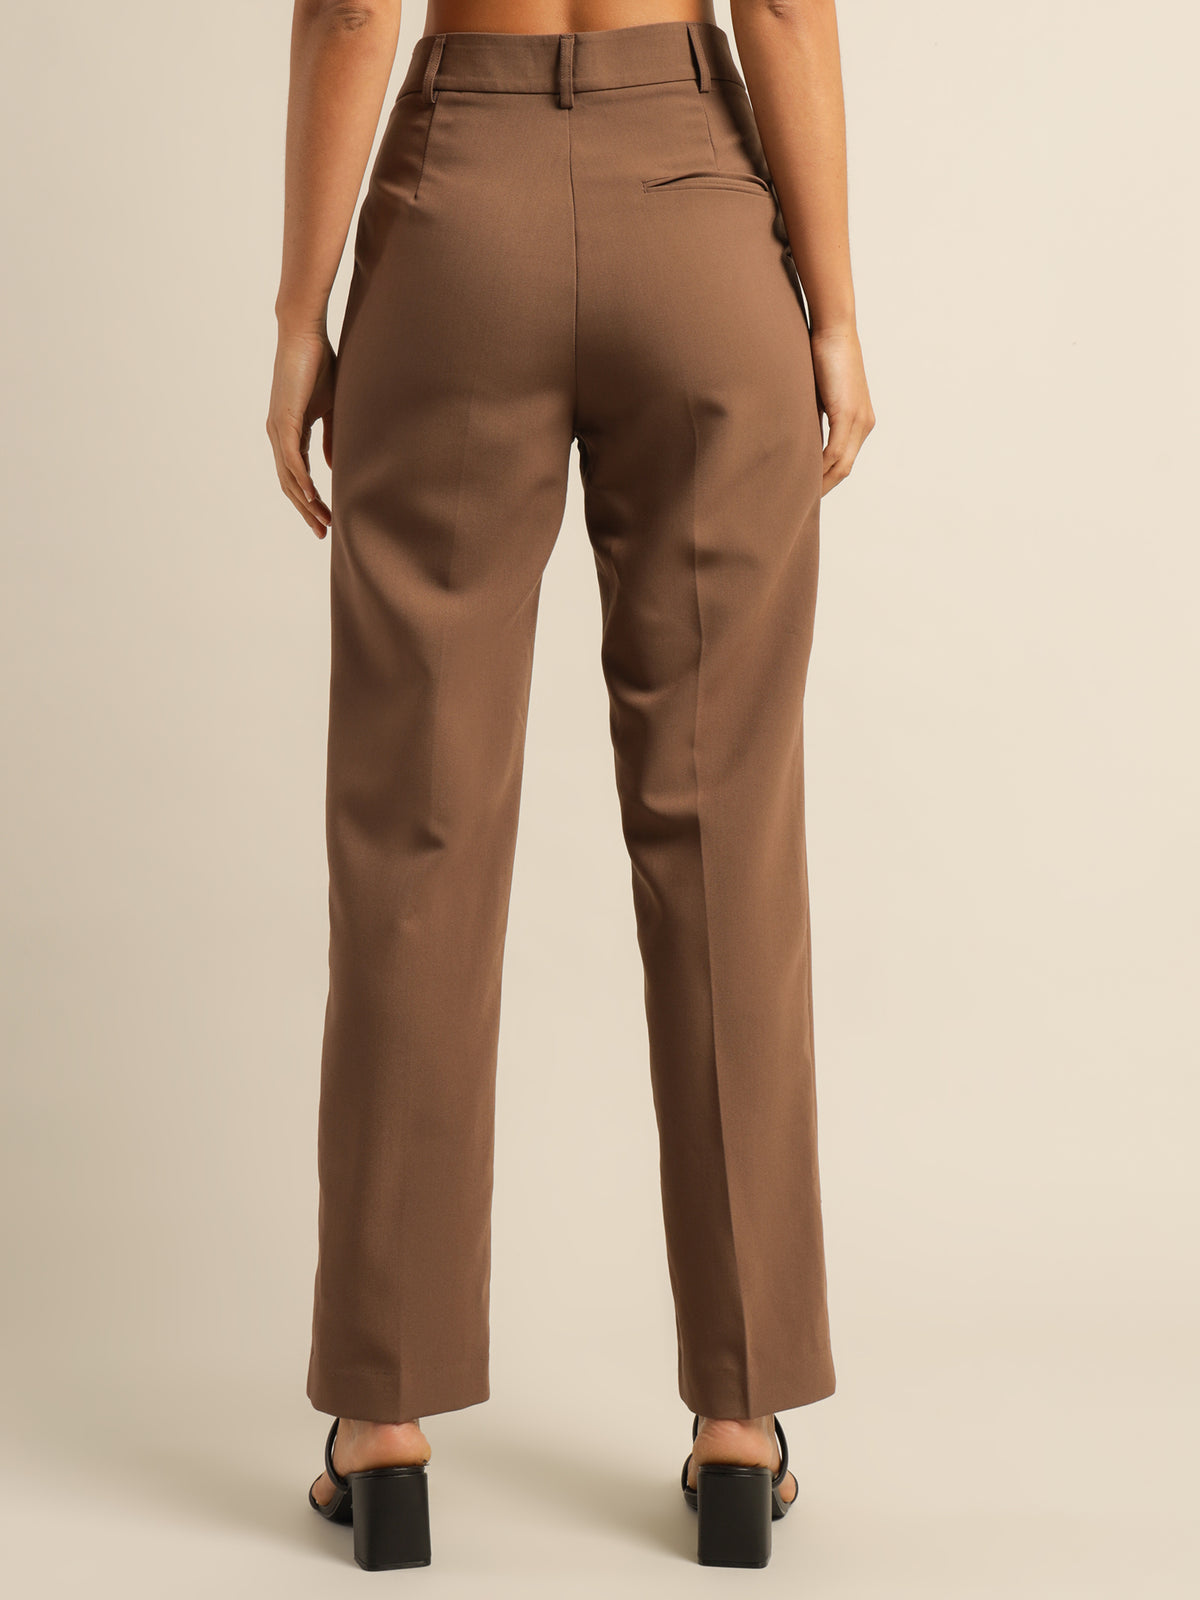 Campbell Pants in Walnut